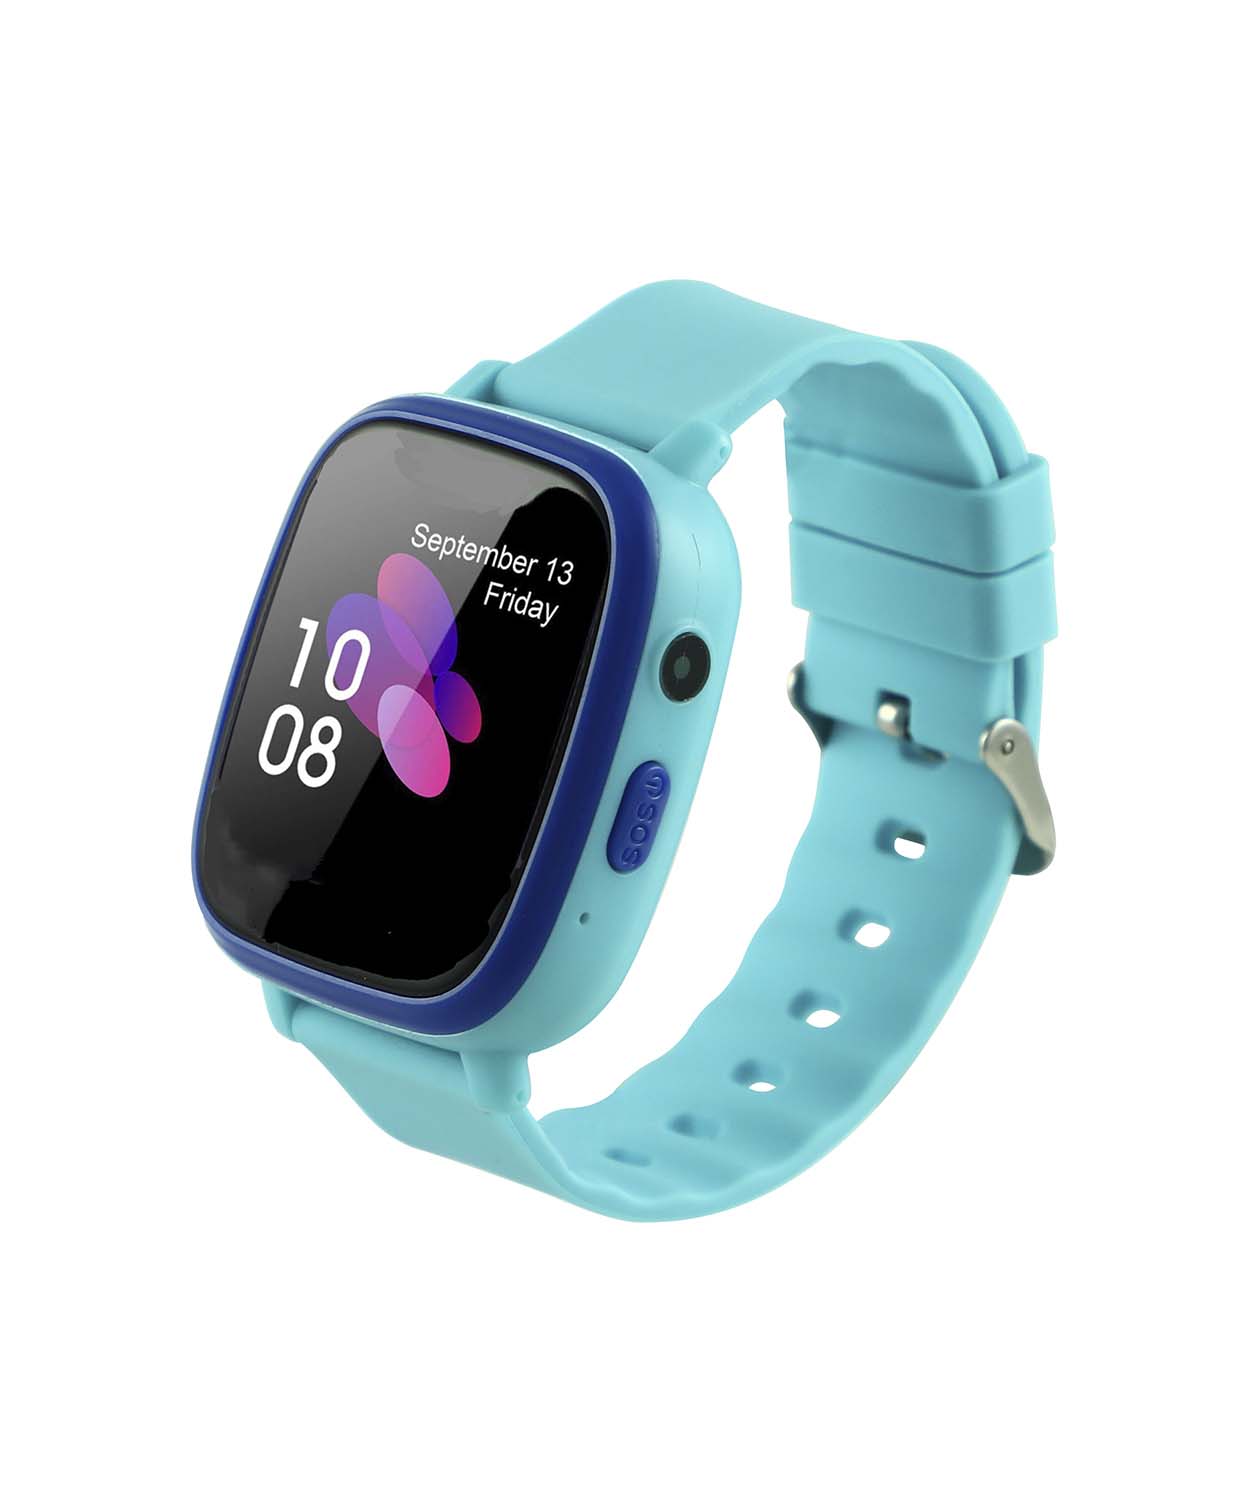 Voice Calling/GPS Tracking Smartwatch